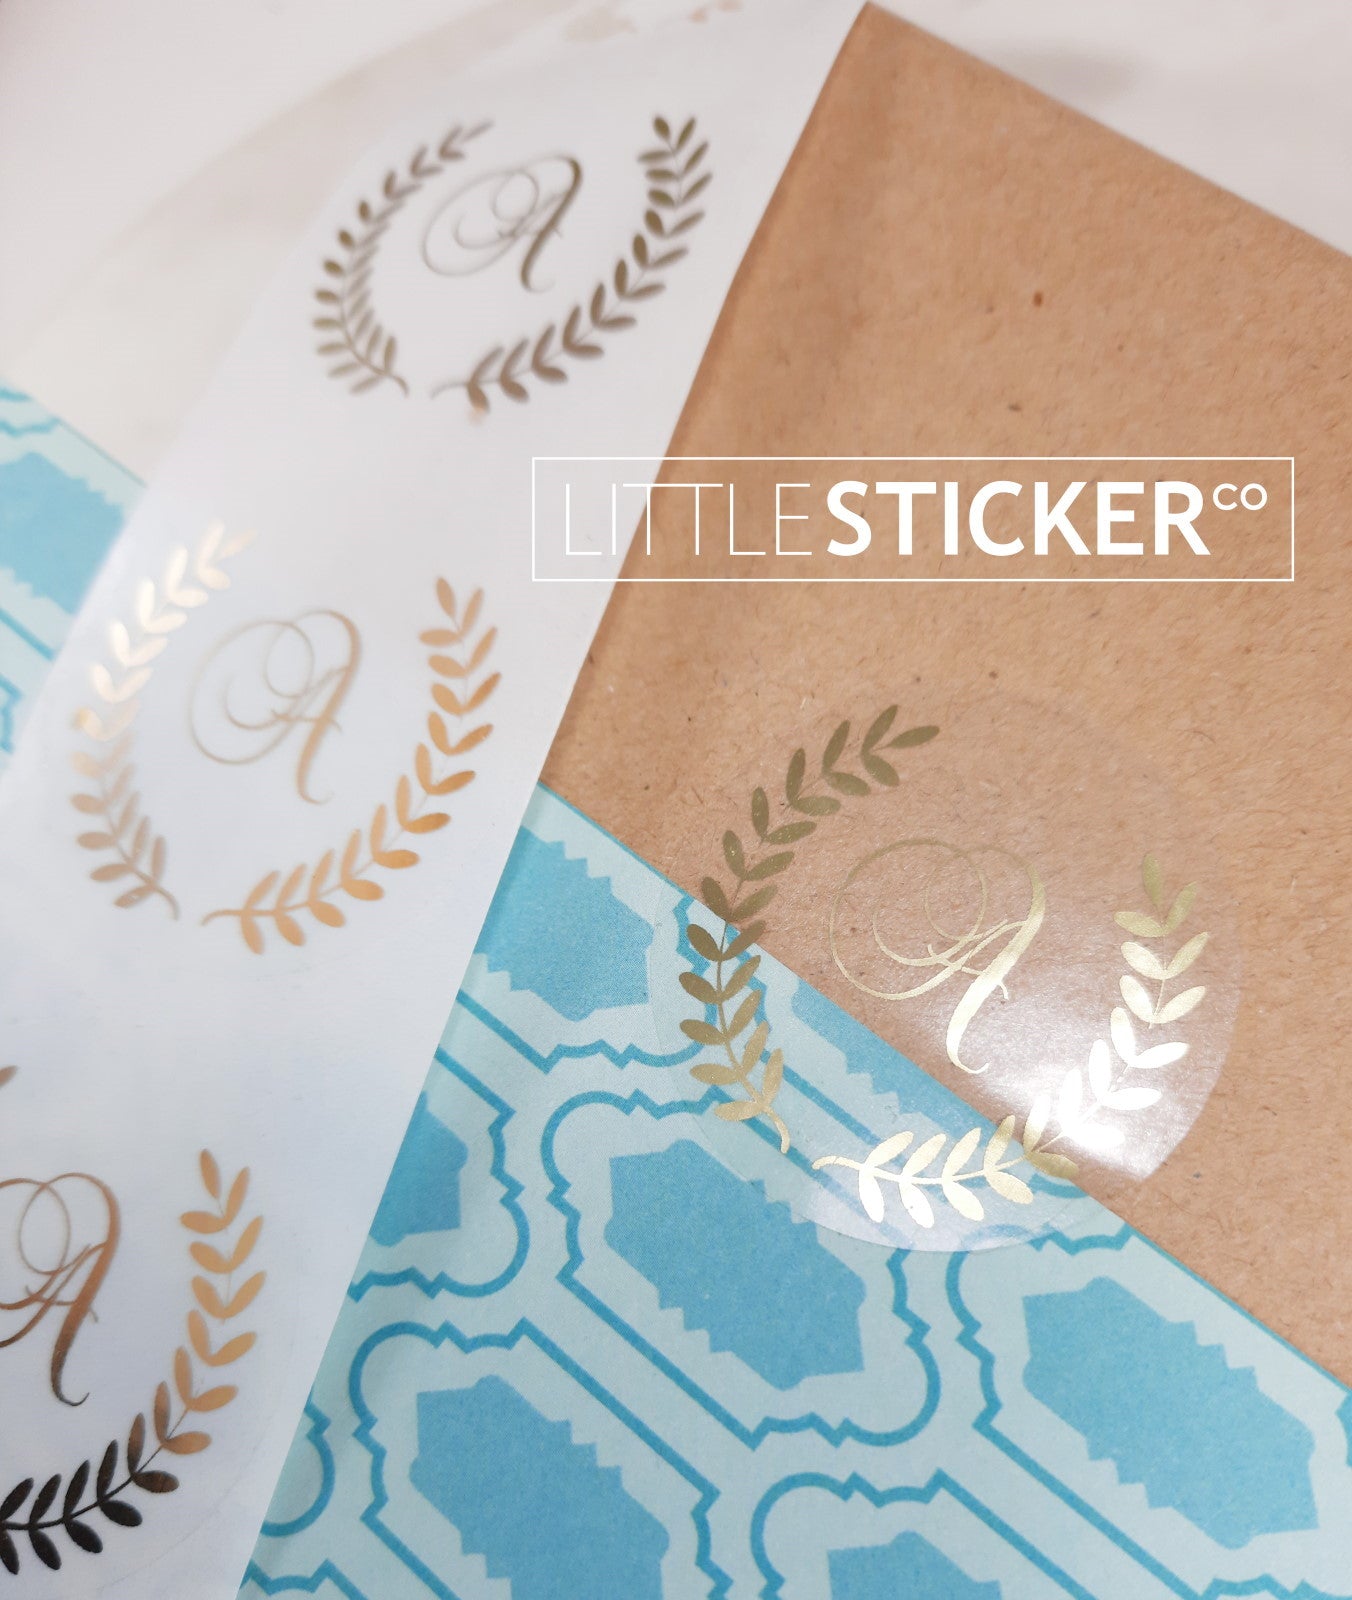 Business product stickers, name or event stickers. Leaf Wreath design with personalised names, numbers, text. Choose sticker colour and size!